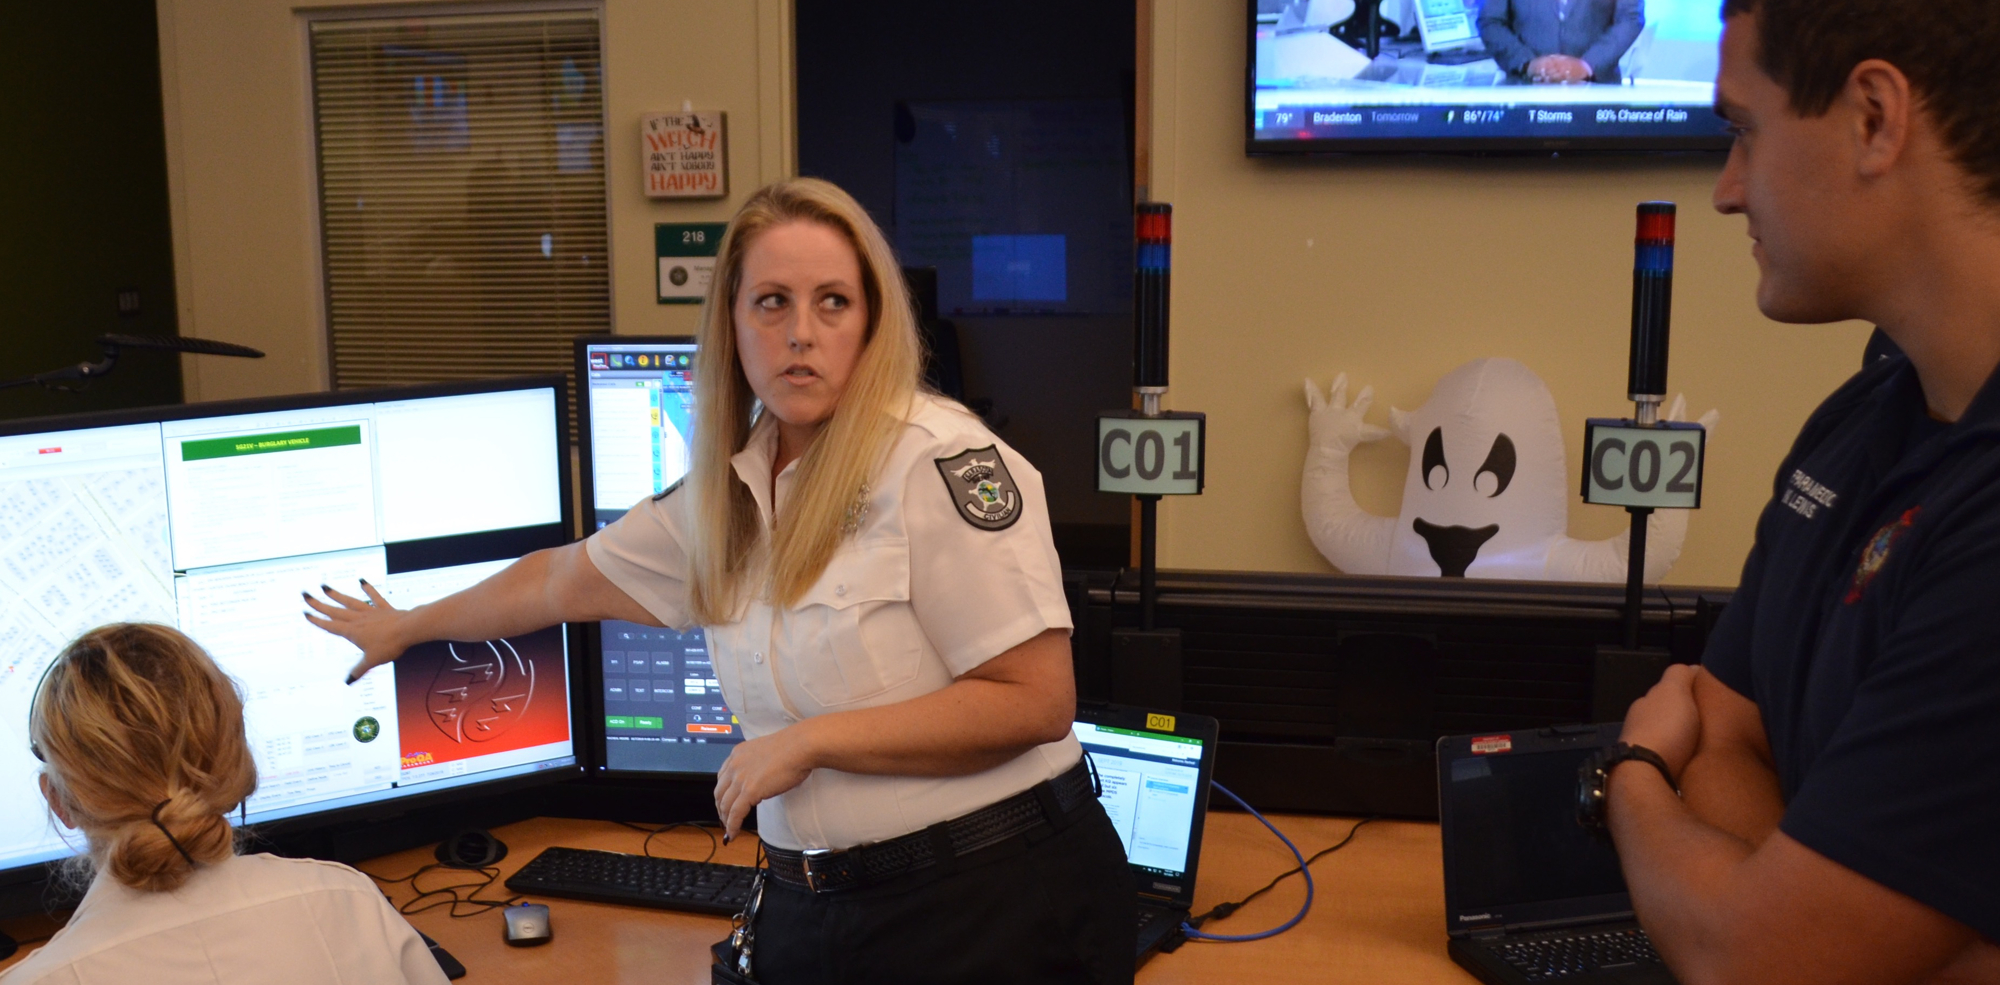 Operations Manager Kristen Fitzpatrick explains one of the call takers' displays to firefighters.